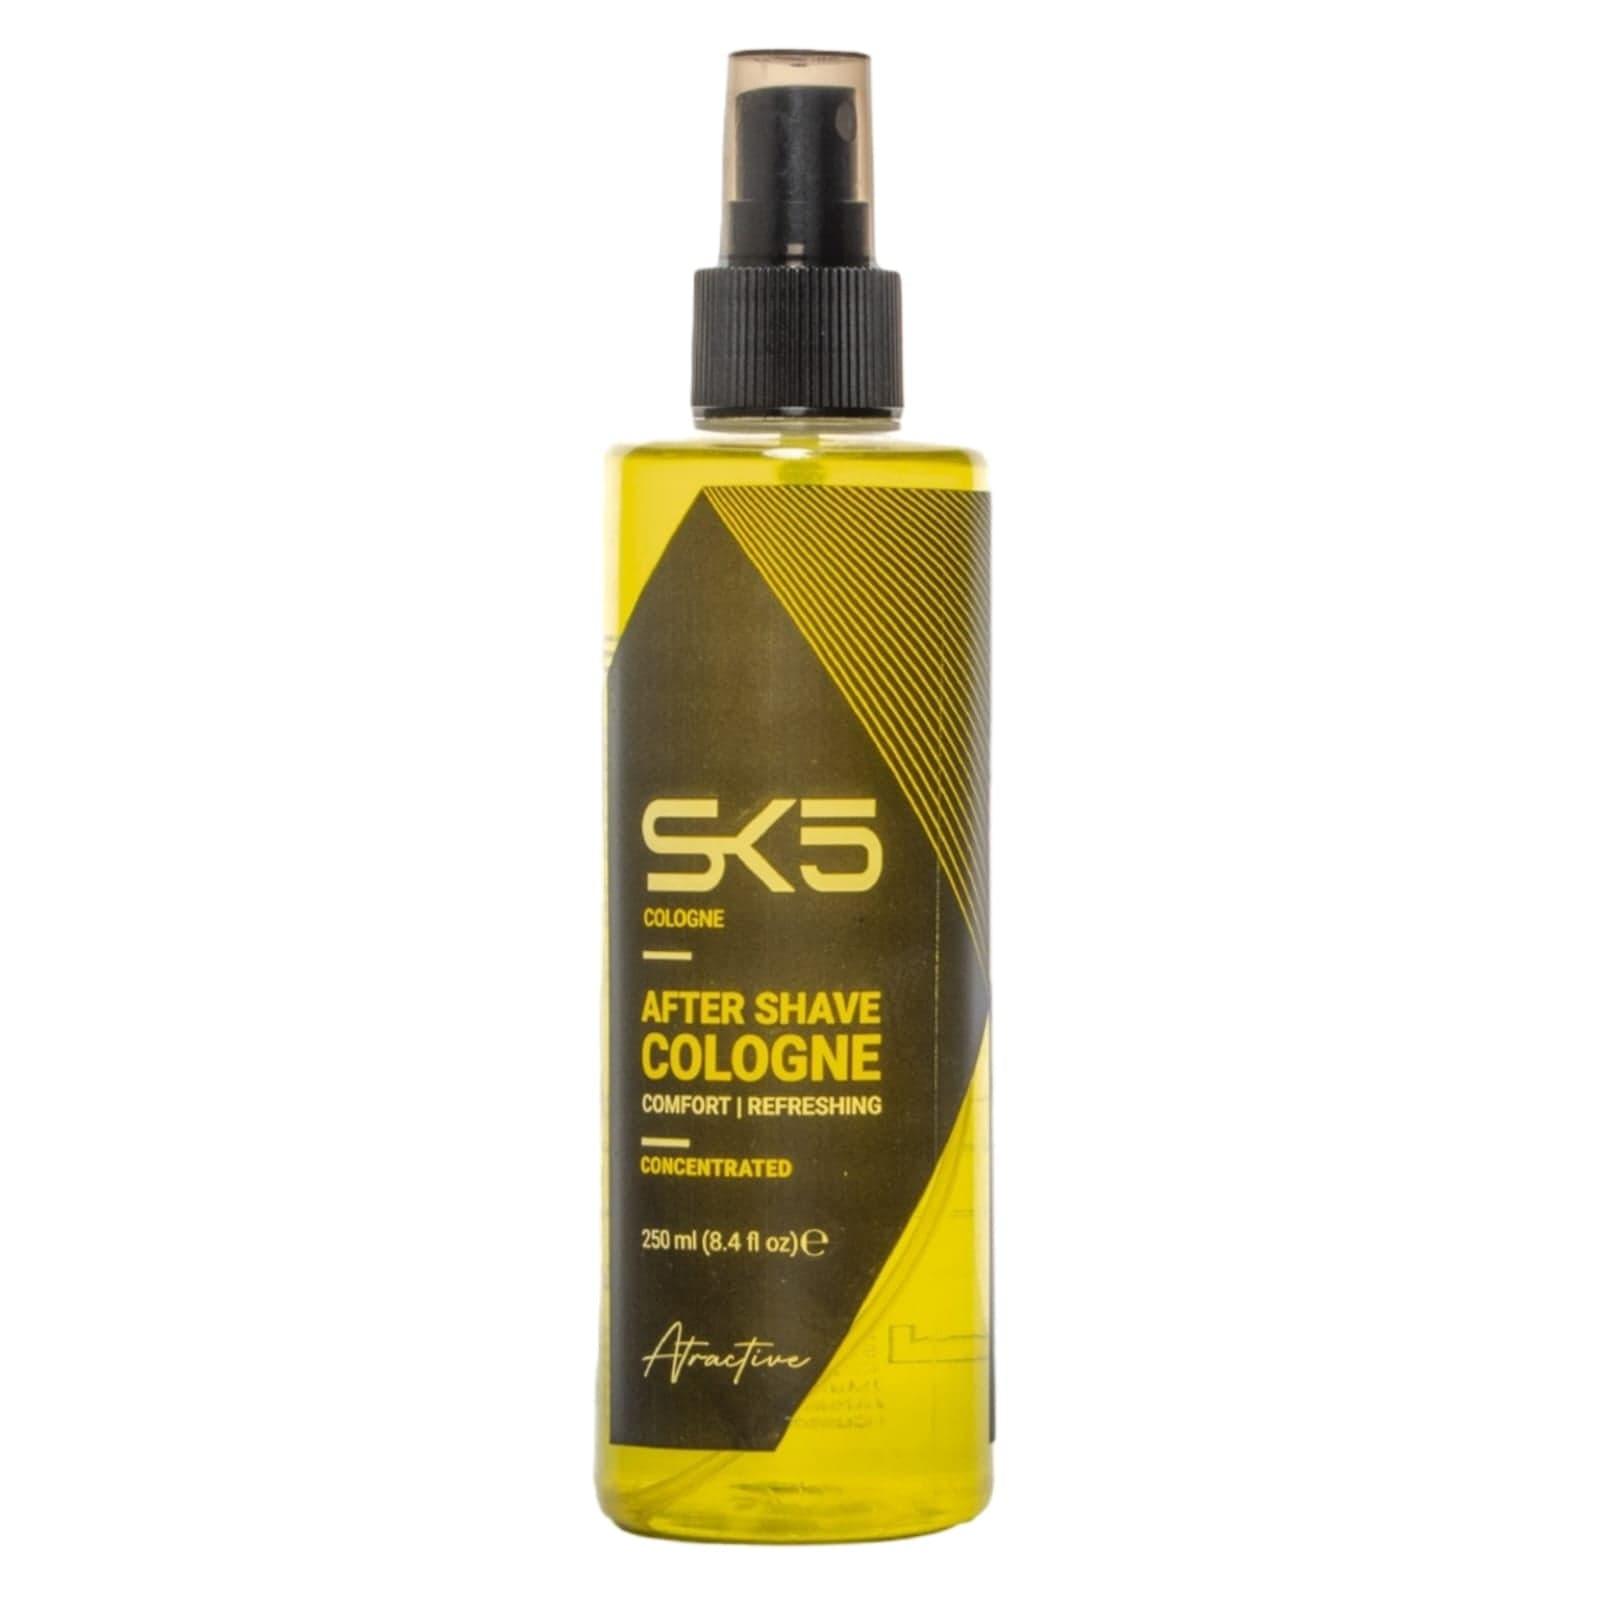 SK5 After Shave Cologne Attraction 250ml